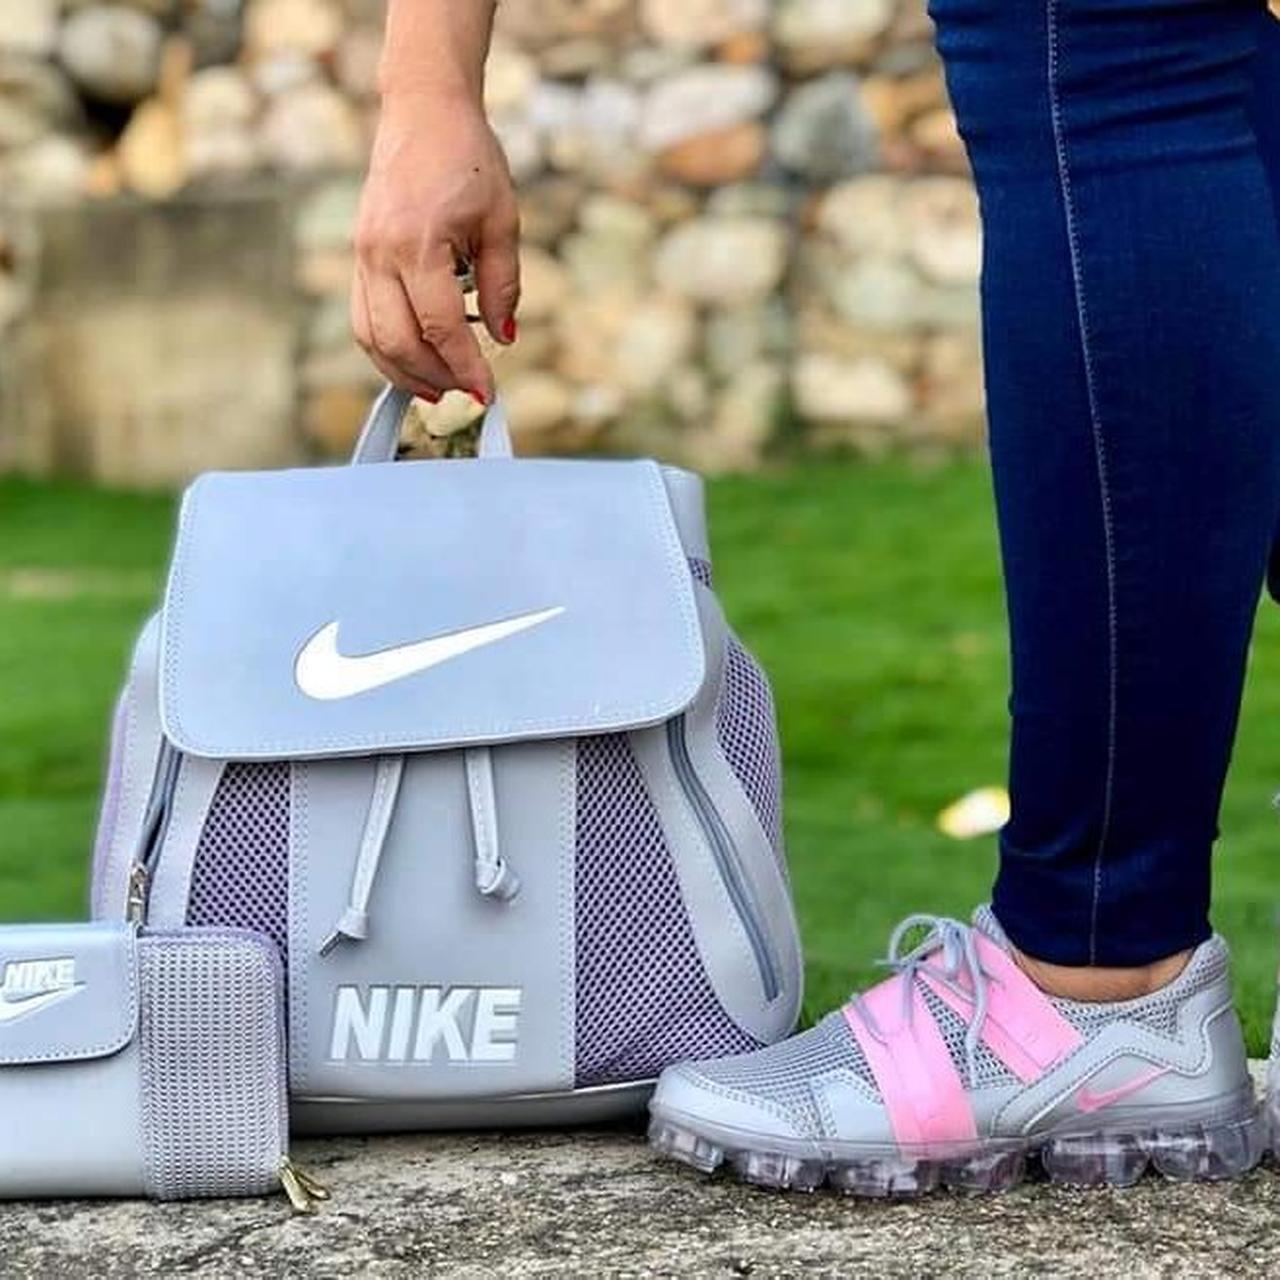 Shoes, Nikes And Purse Set